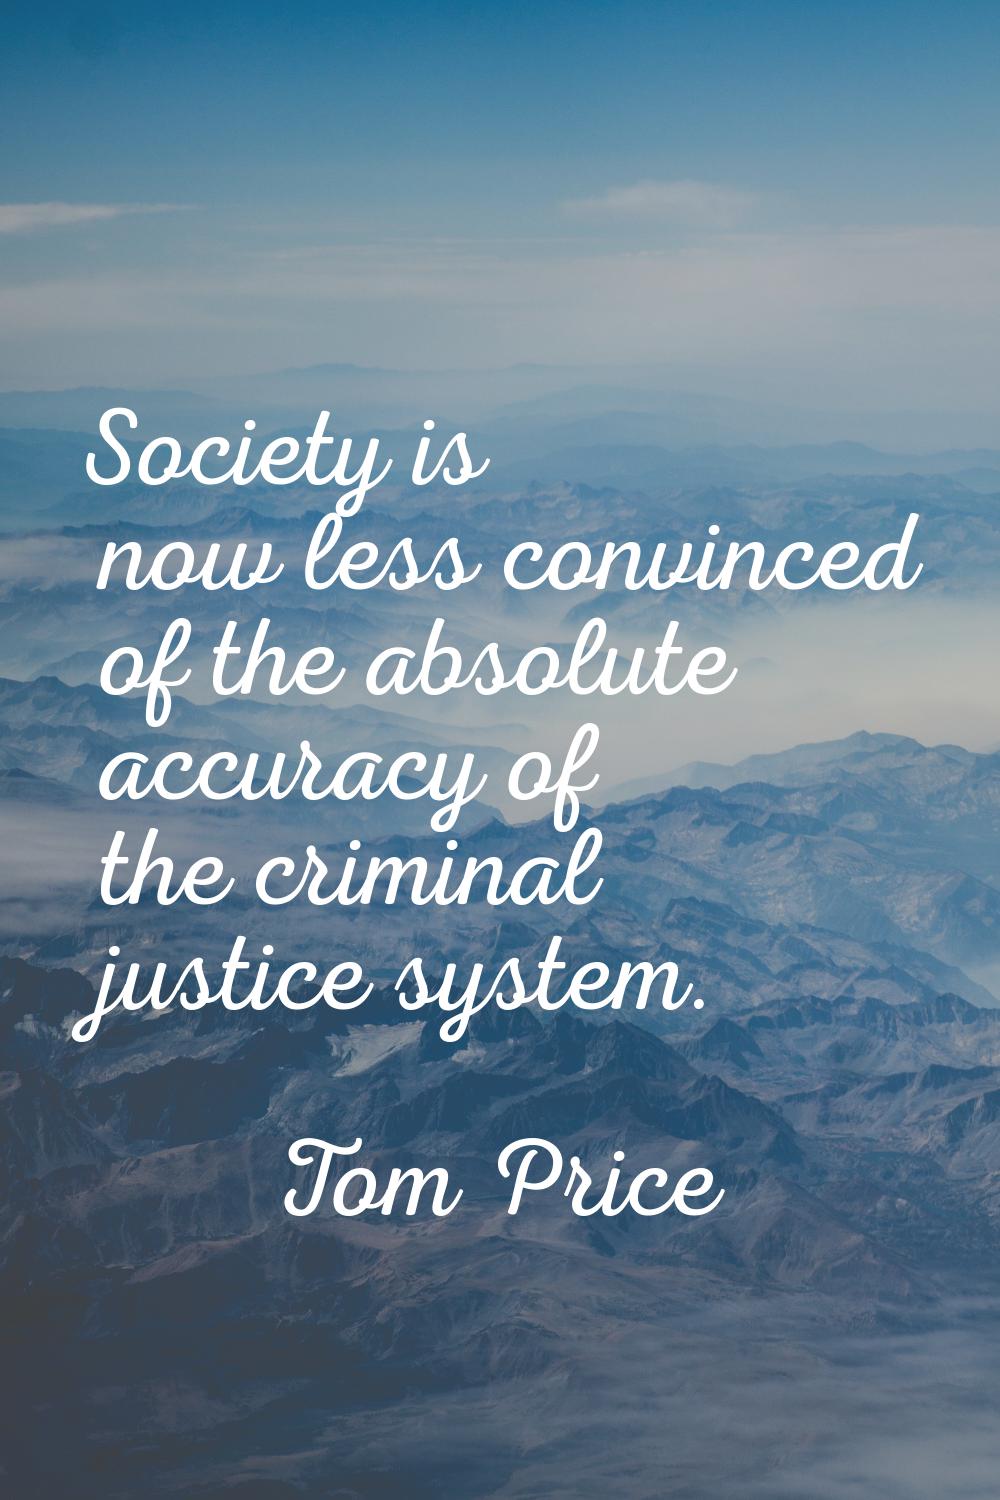 Society is now less convinced of the absolute accuracy of the criminal justice system.